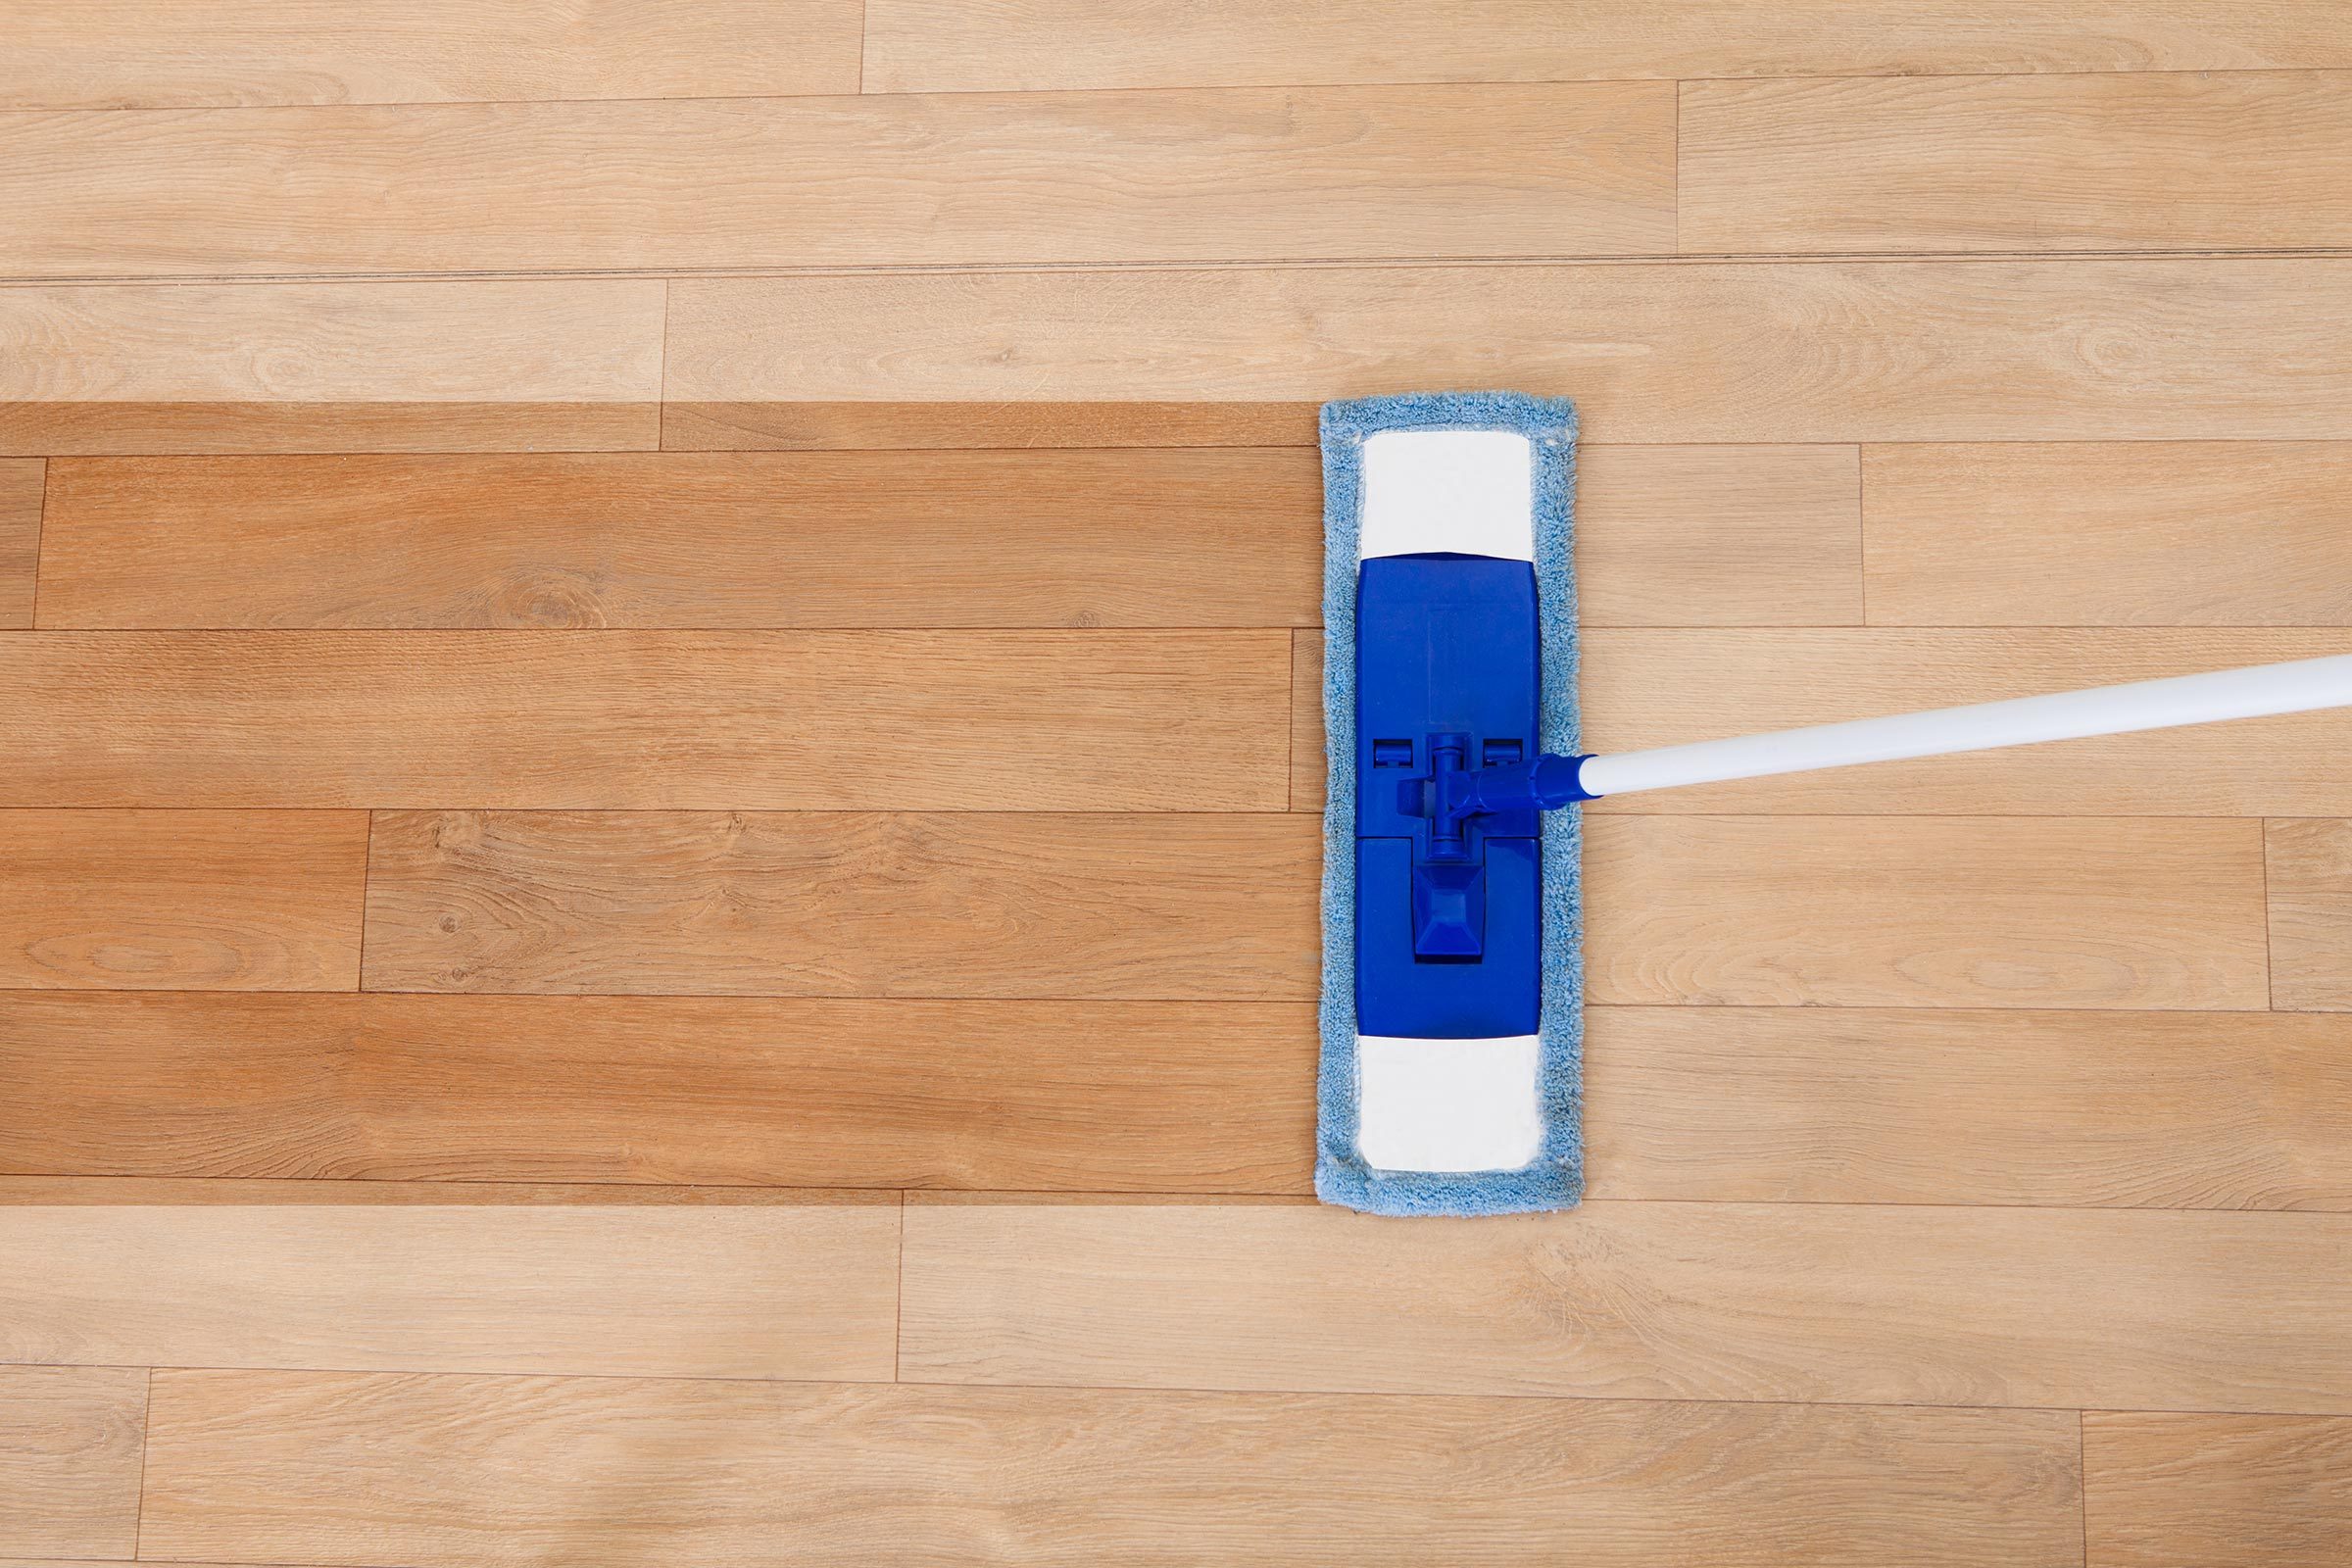 What Should You Not Clean Vinyl Plank Flooring With